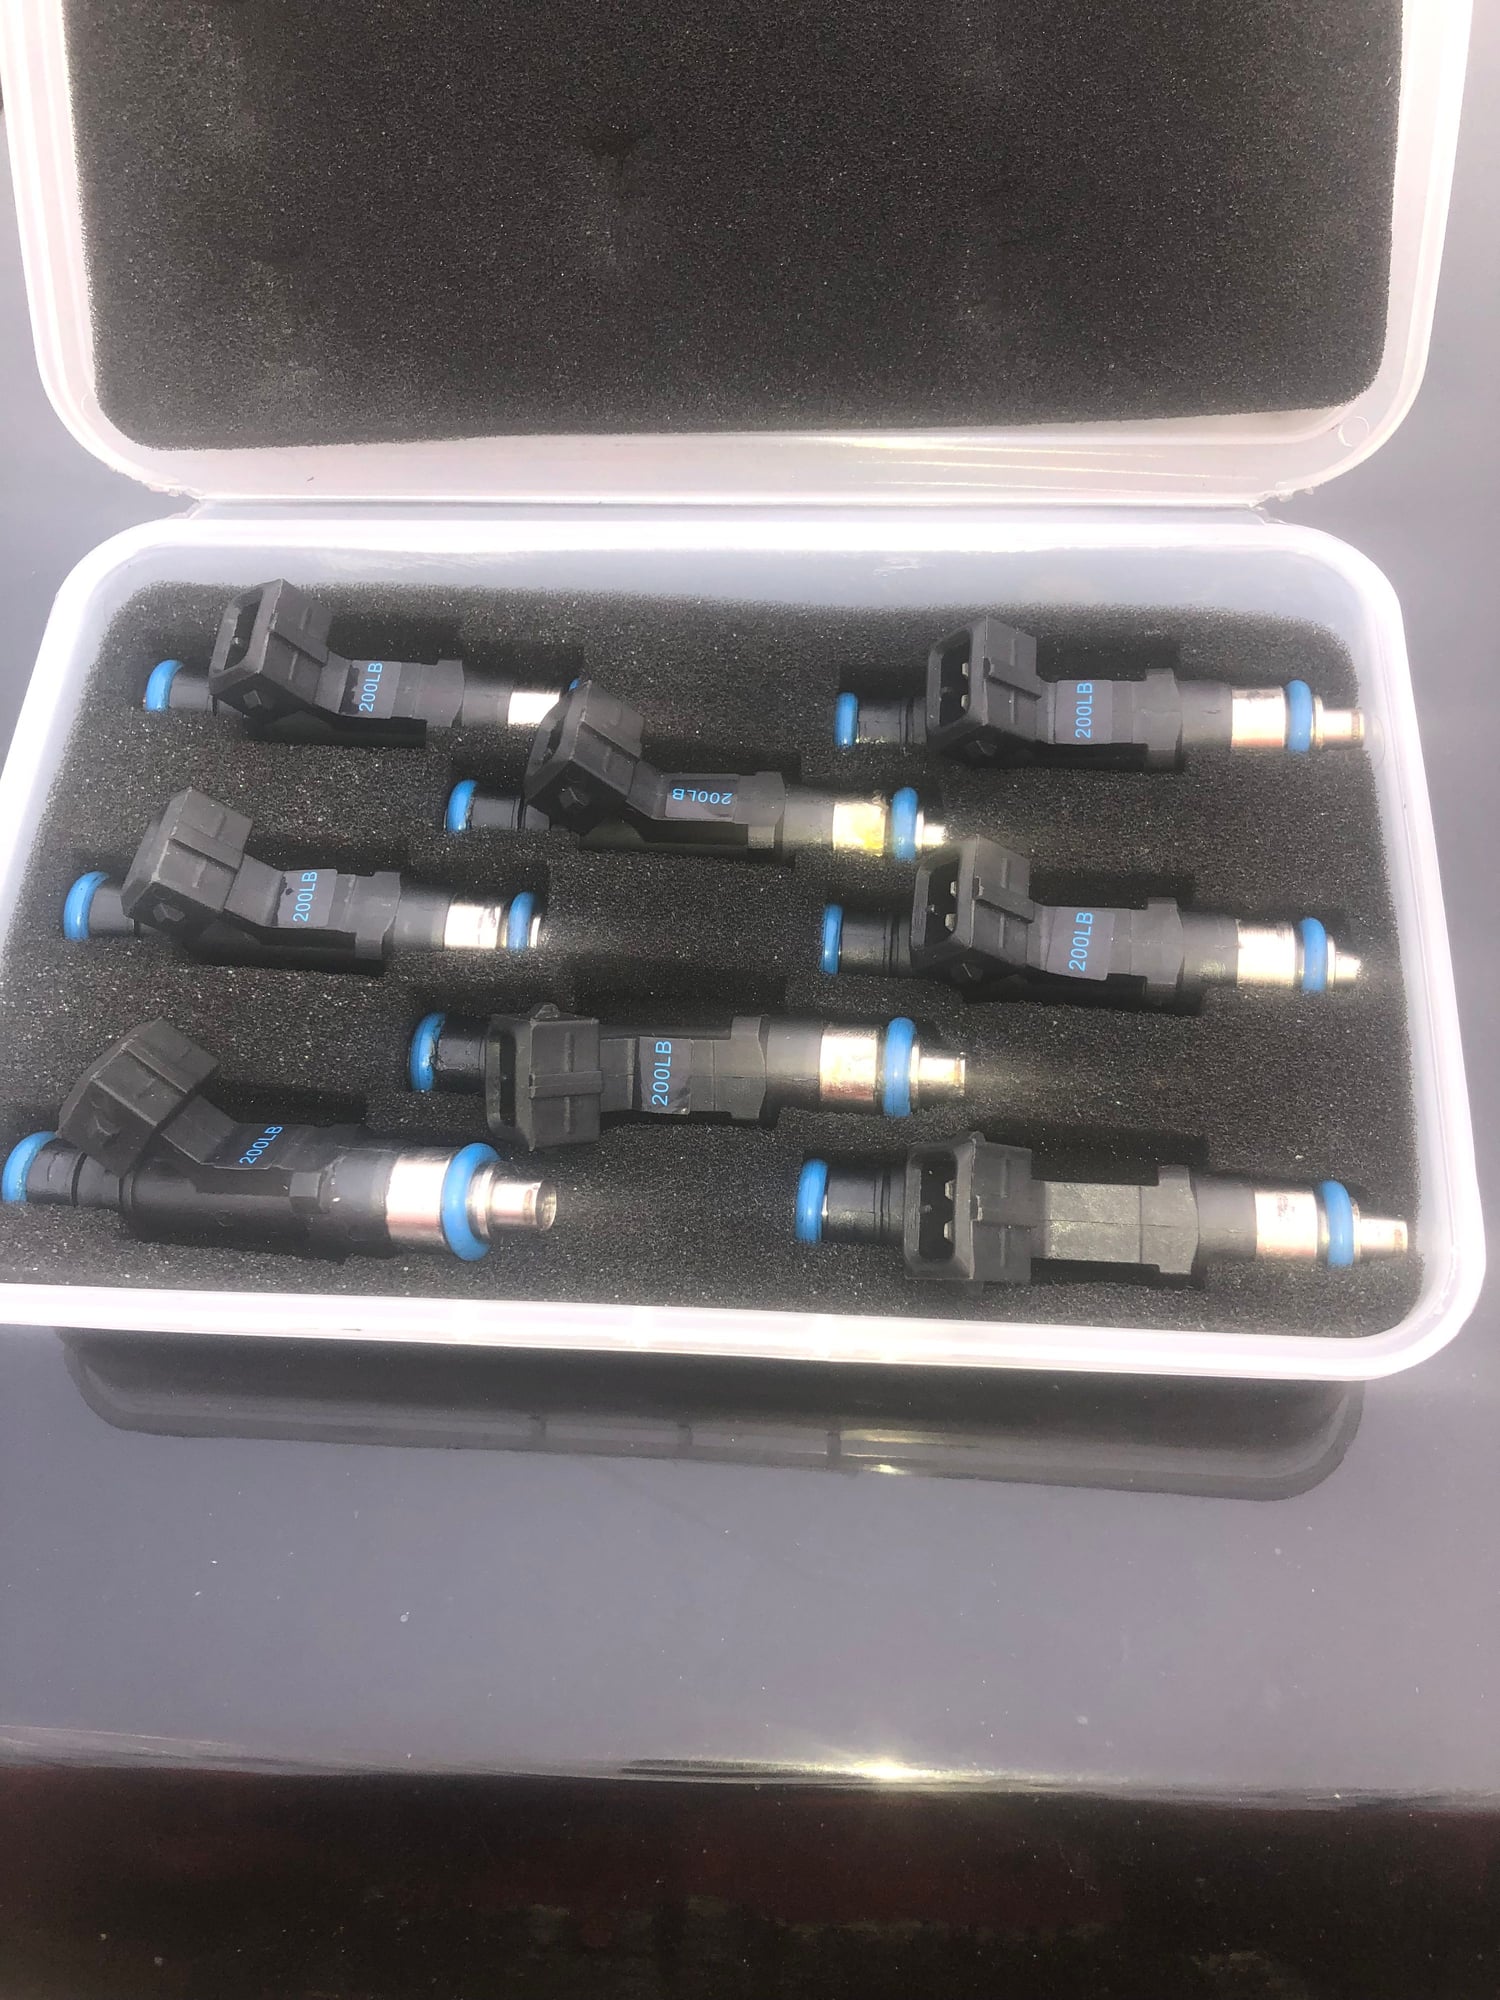  - HPI 200# injectors $400 shipped - Melrose Park, IL 60160, United States